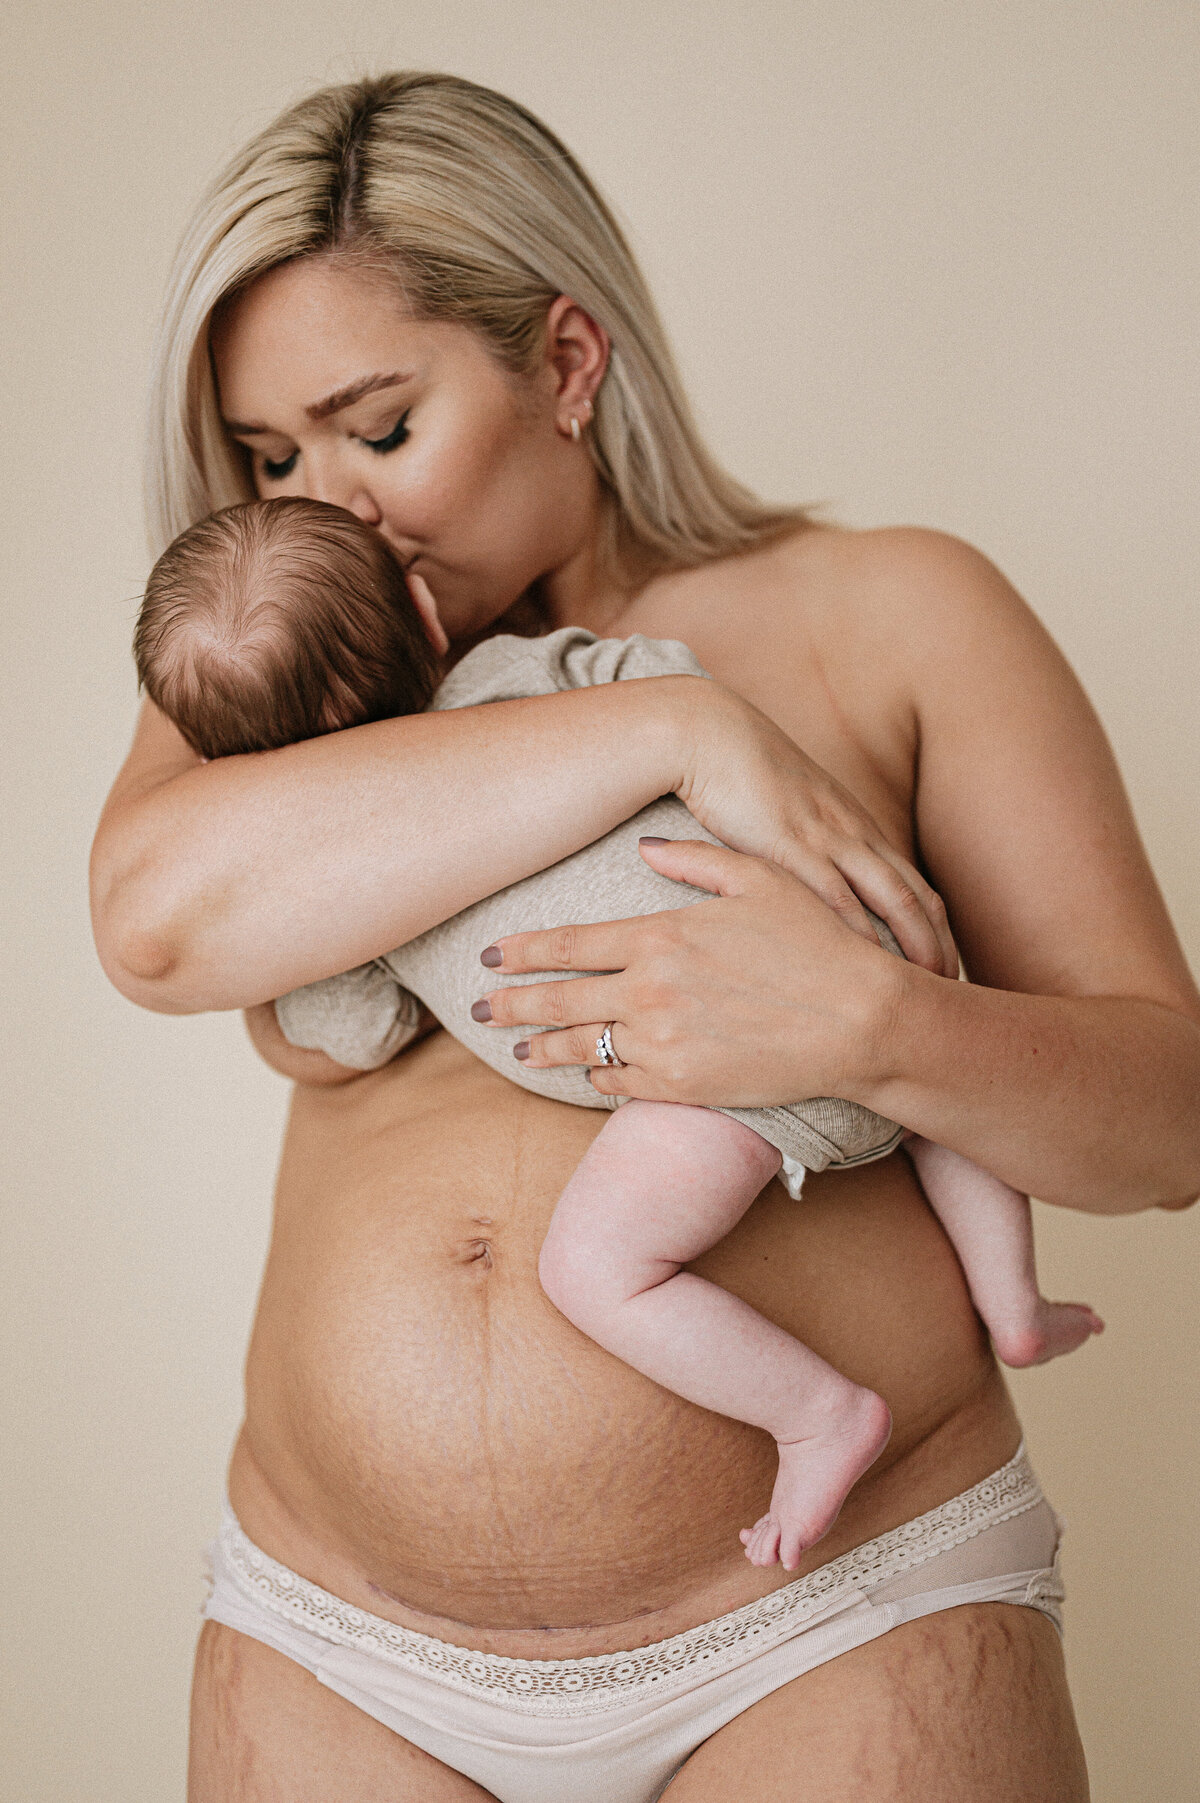 New postpartum mother with c-section scar kisses her newborn baby during a photoshoot near Bristol